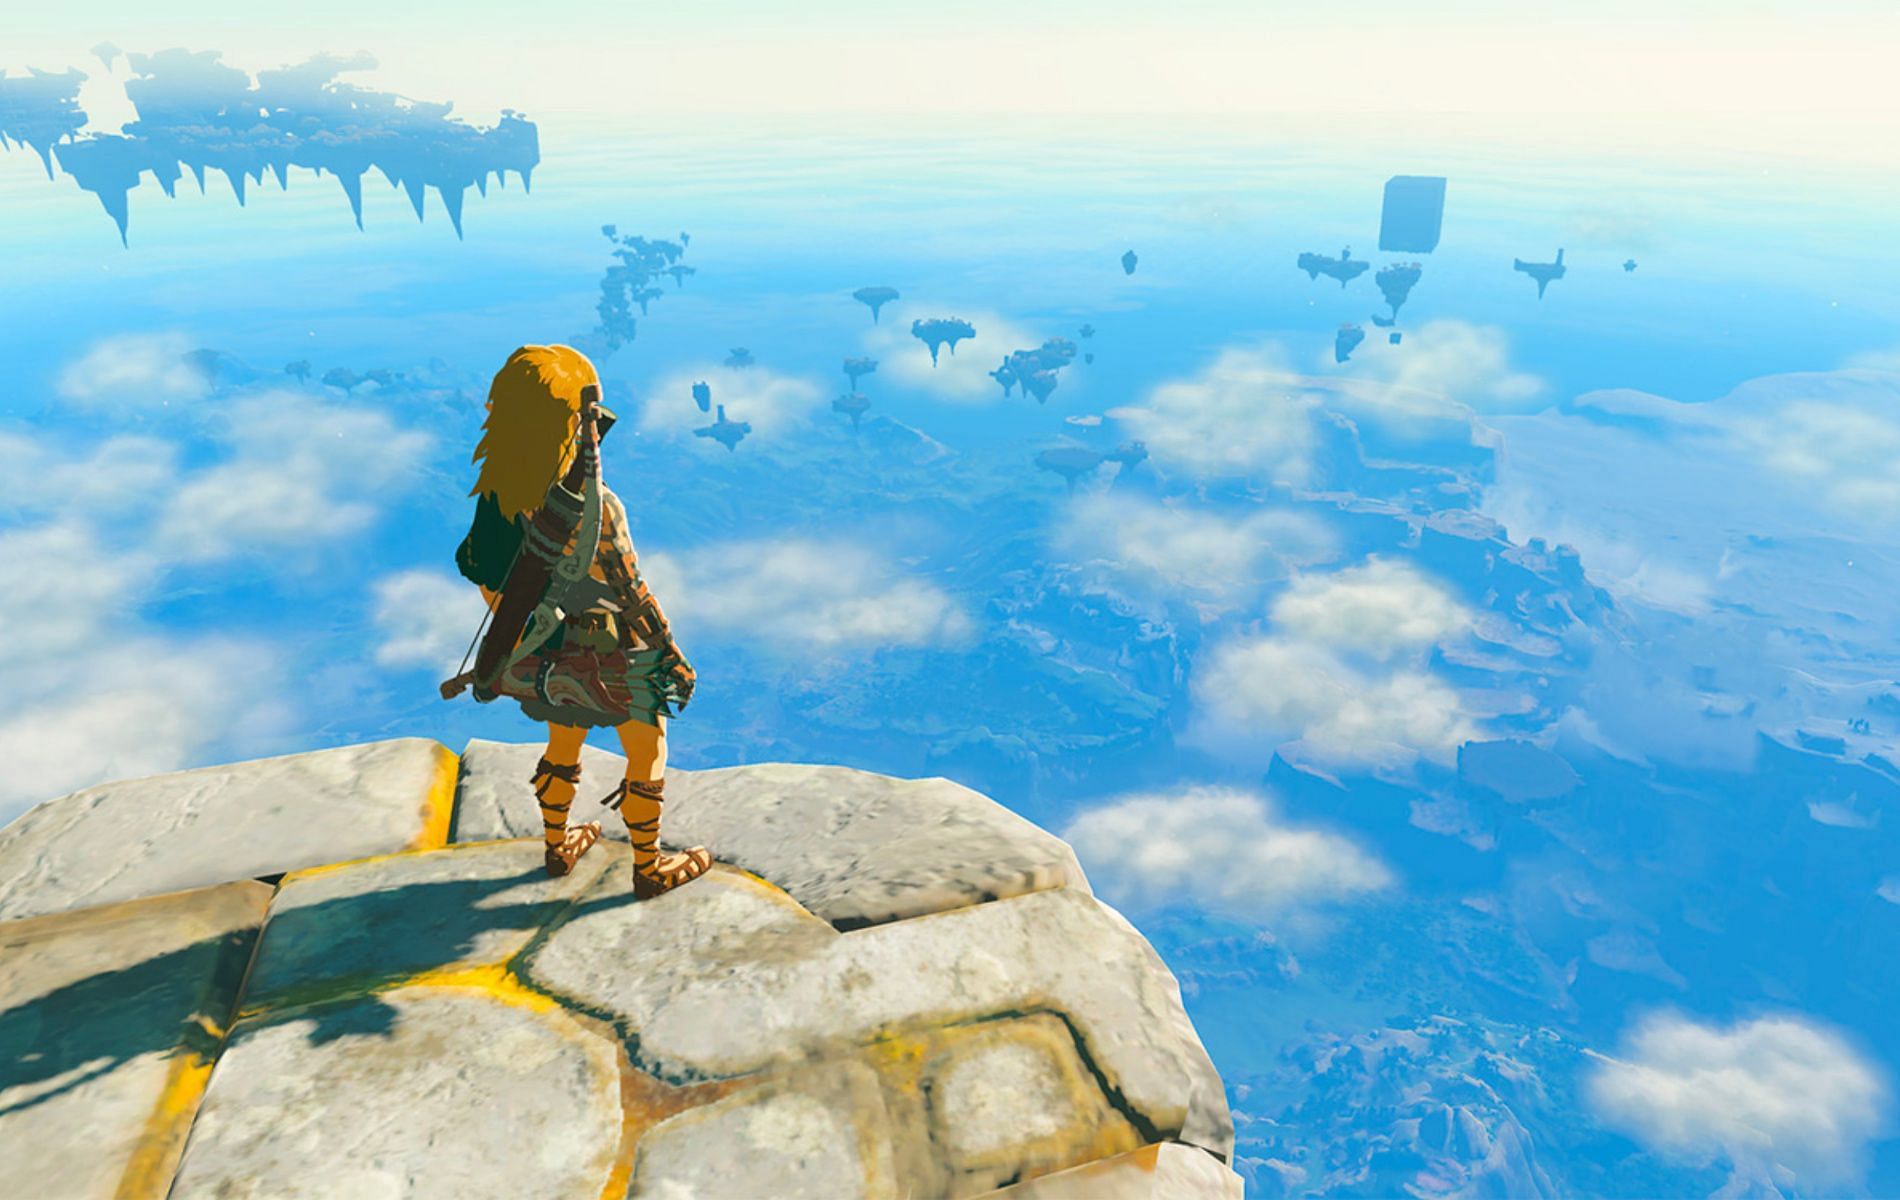 The brand new green tunic worn by Link can be found early on in the game (Image via Nintendo)